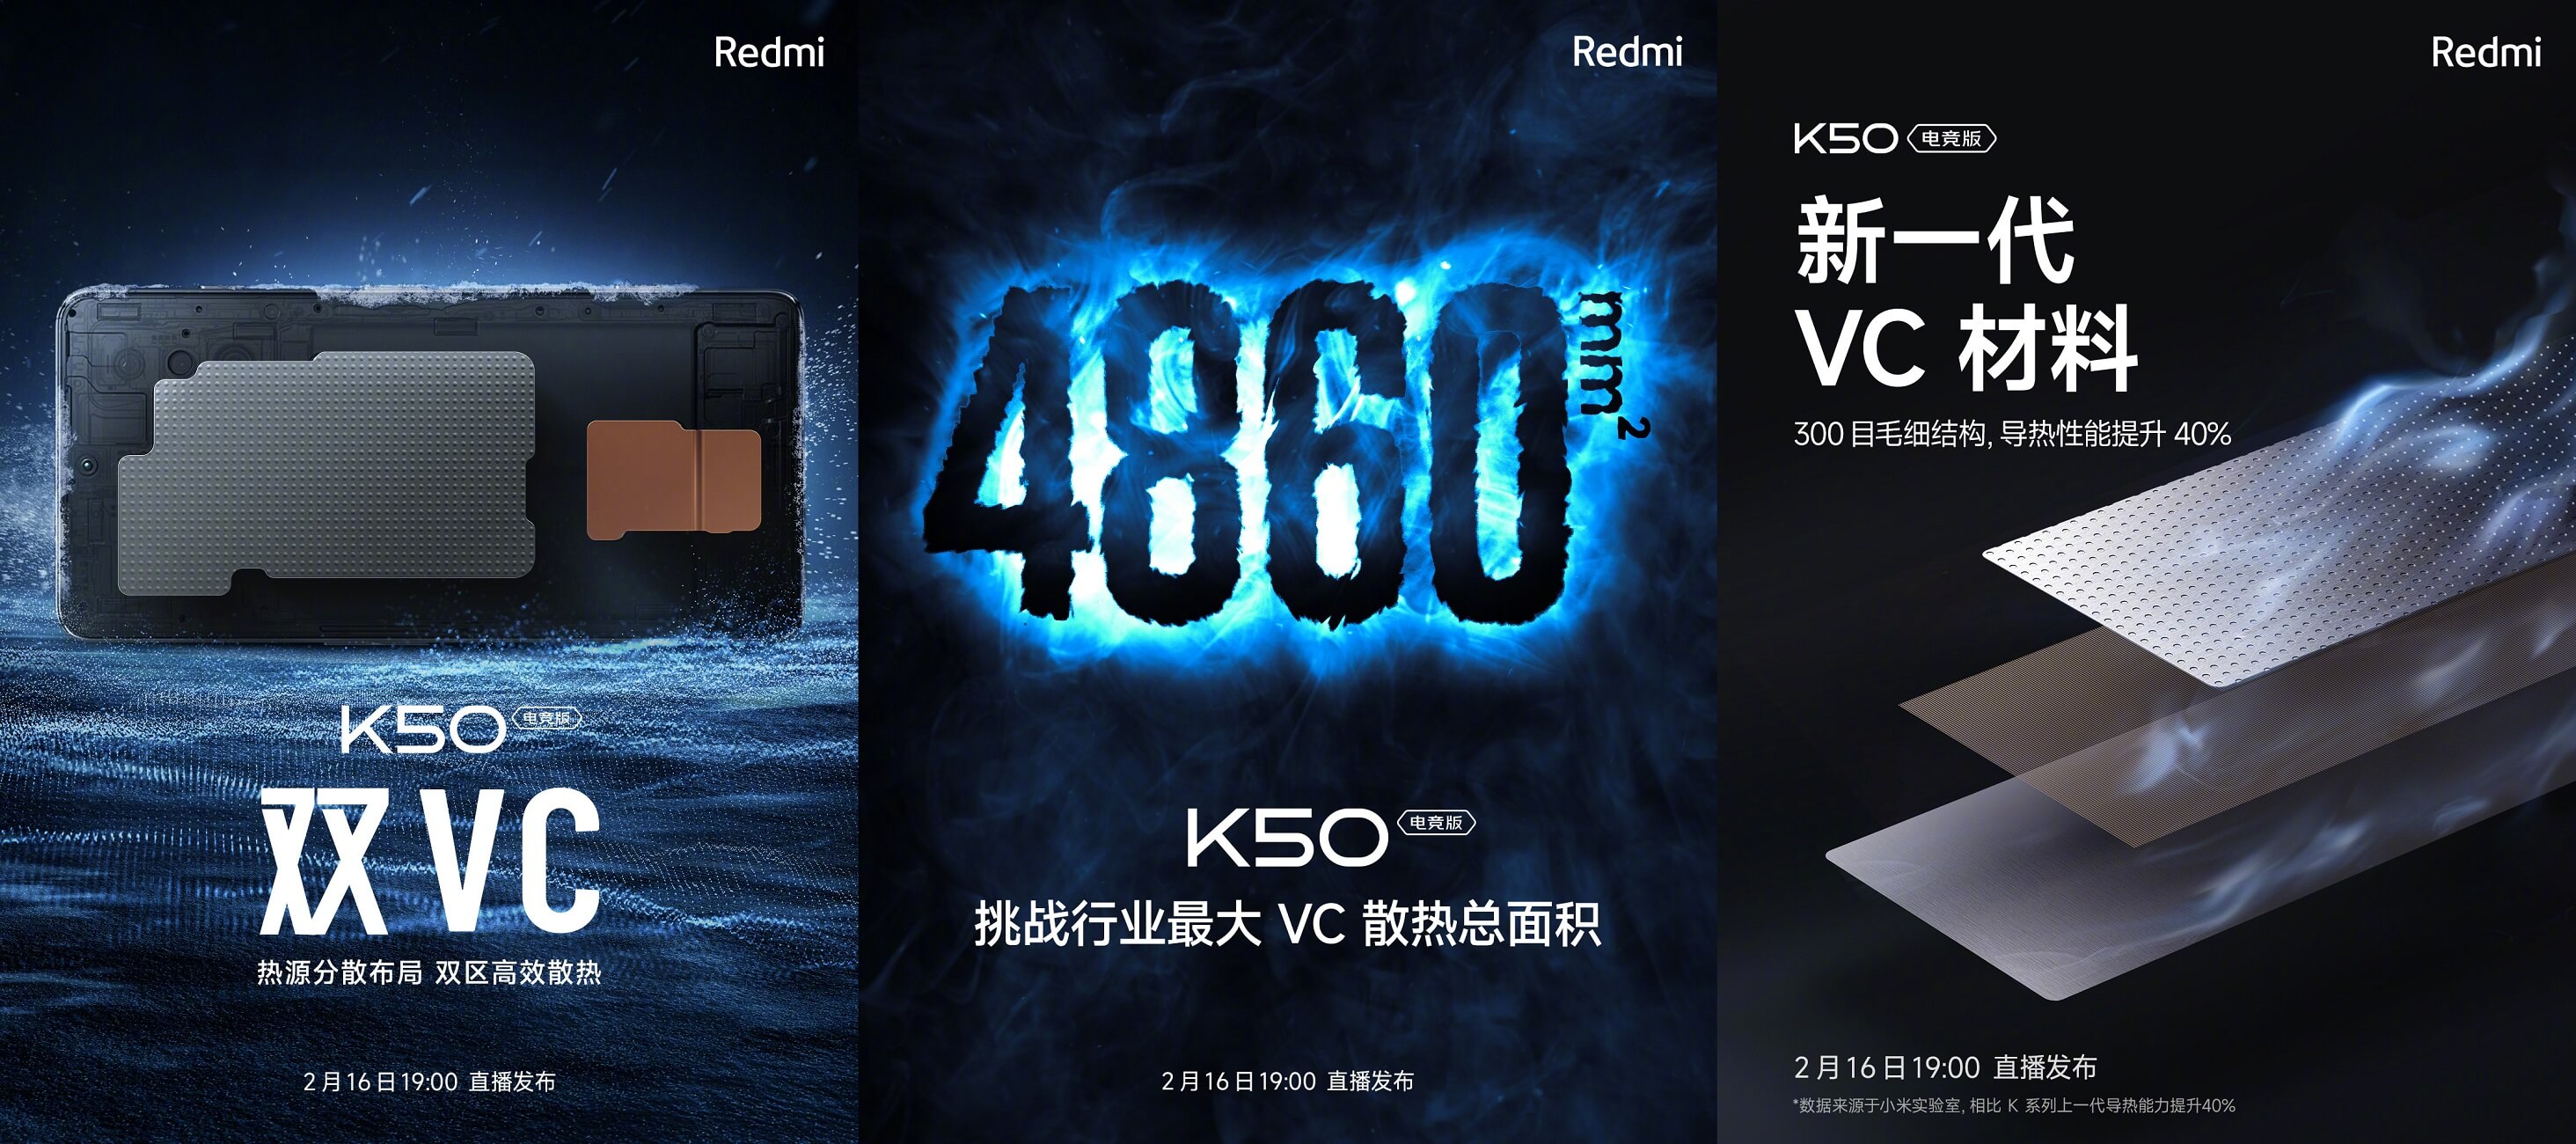 Redmi K50 gaming edition VC Cooling system